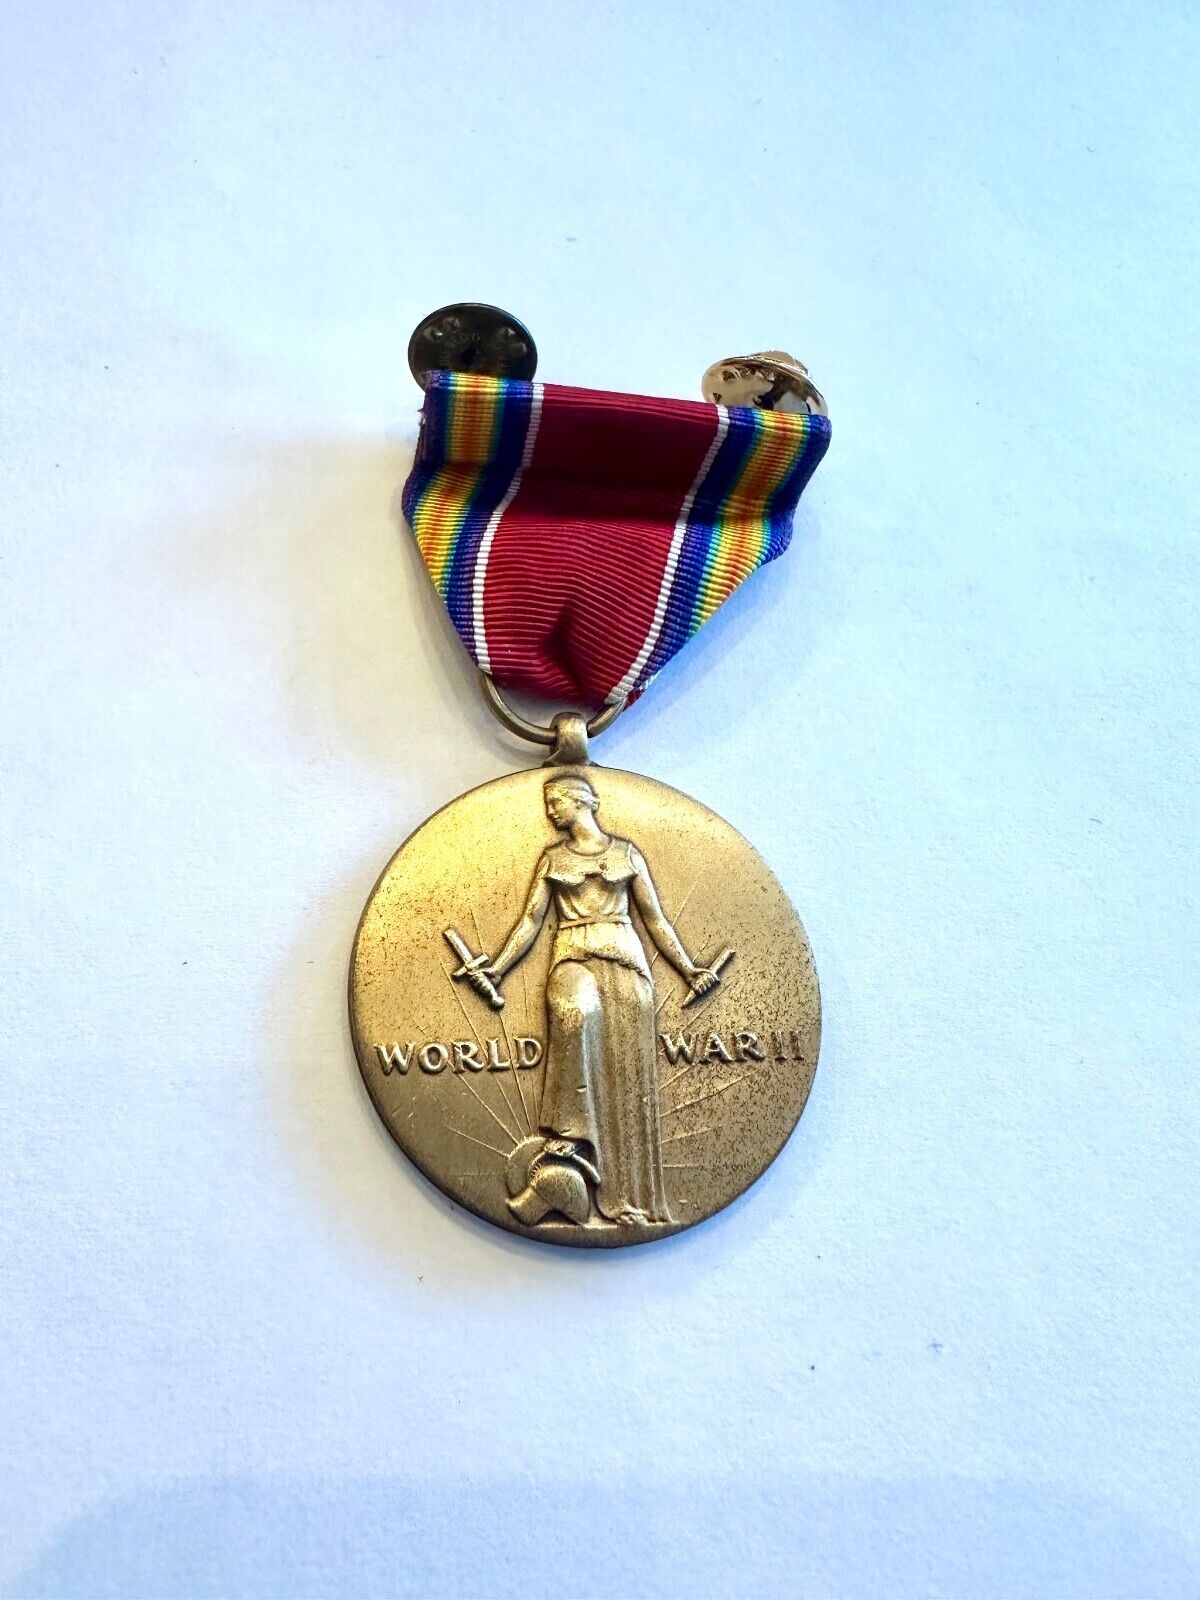 WWII CAMPAIGN AND SERVICE MEDAL -- EXCELLENT CONDITION, CLEAN